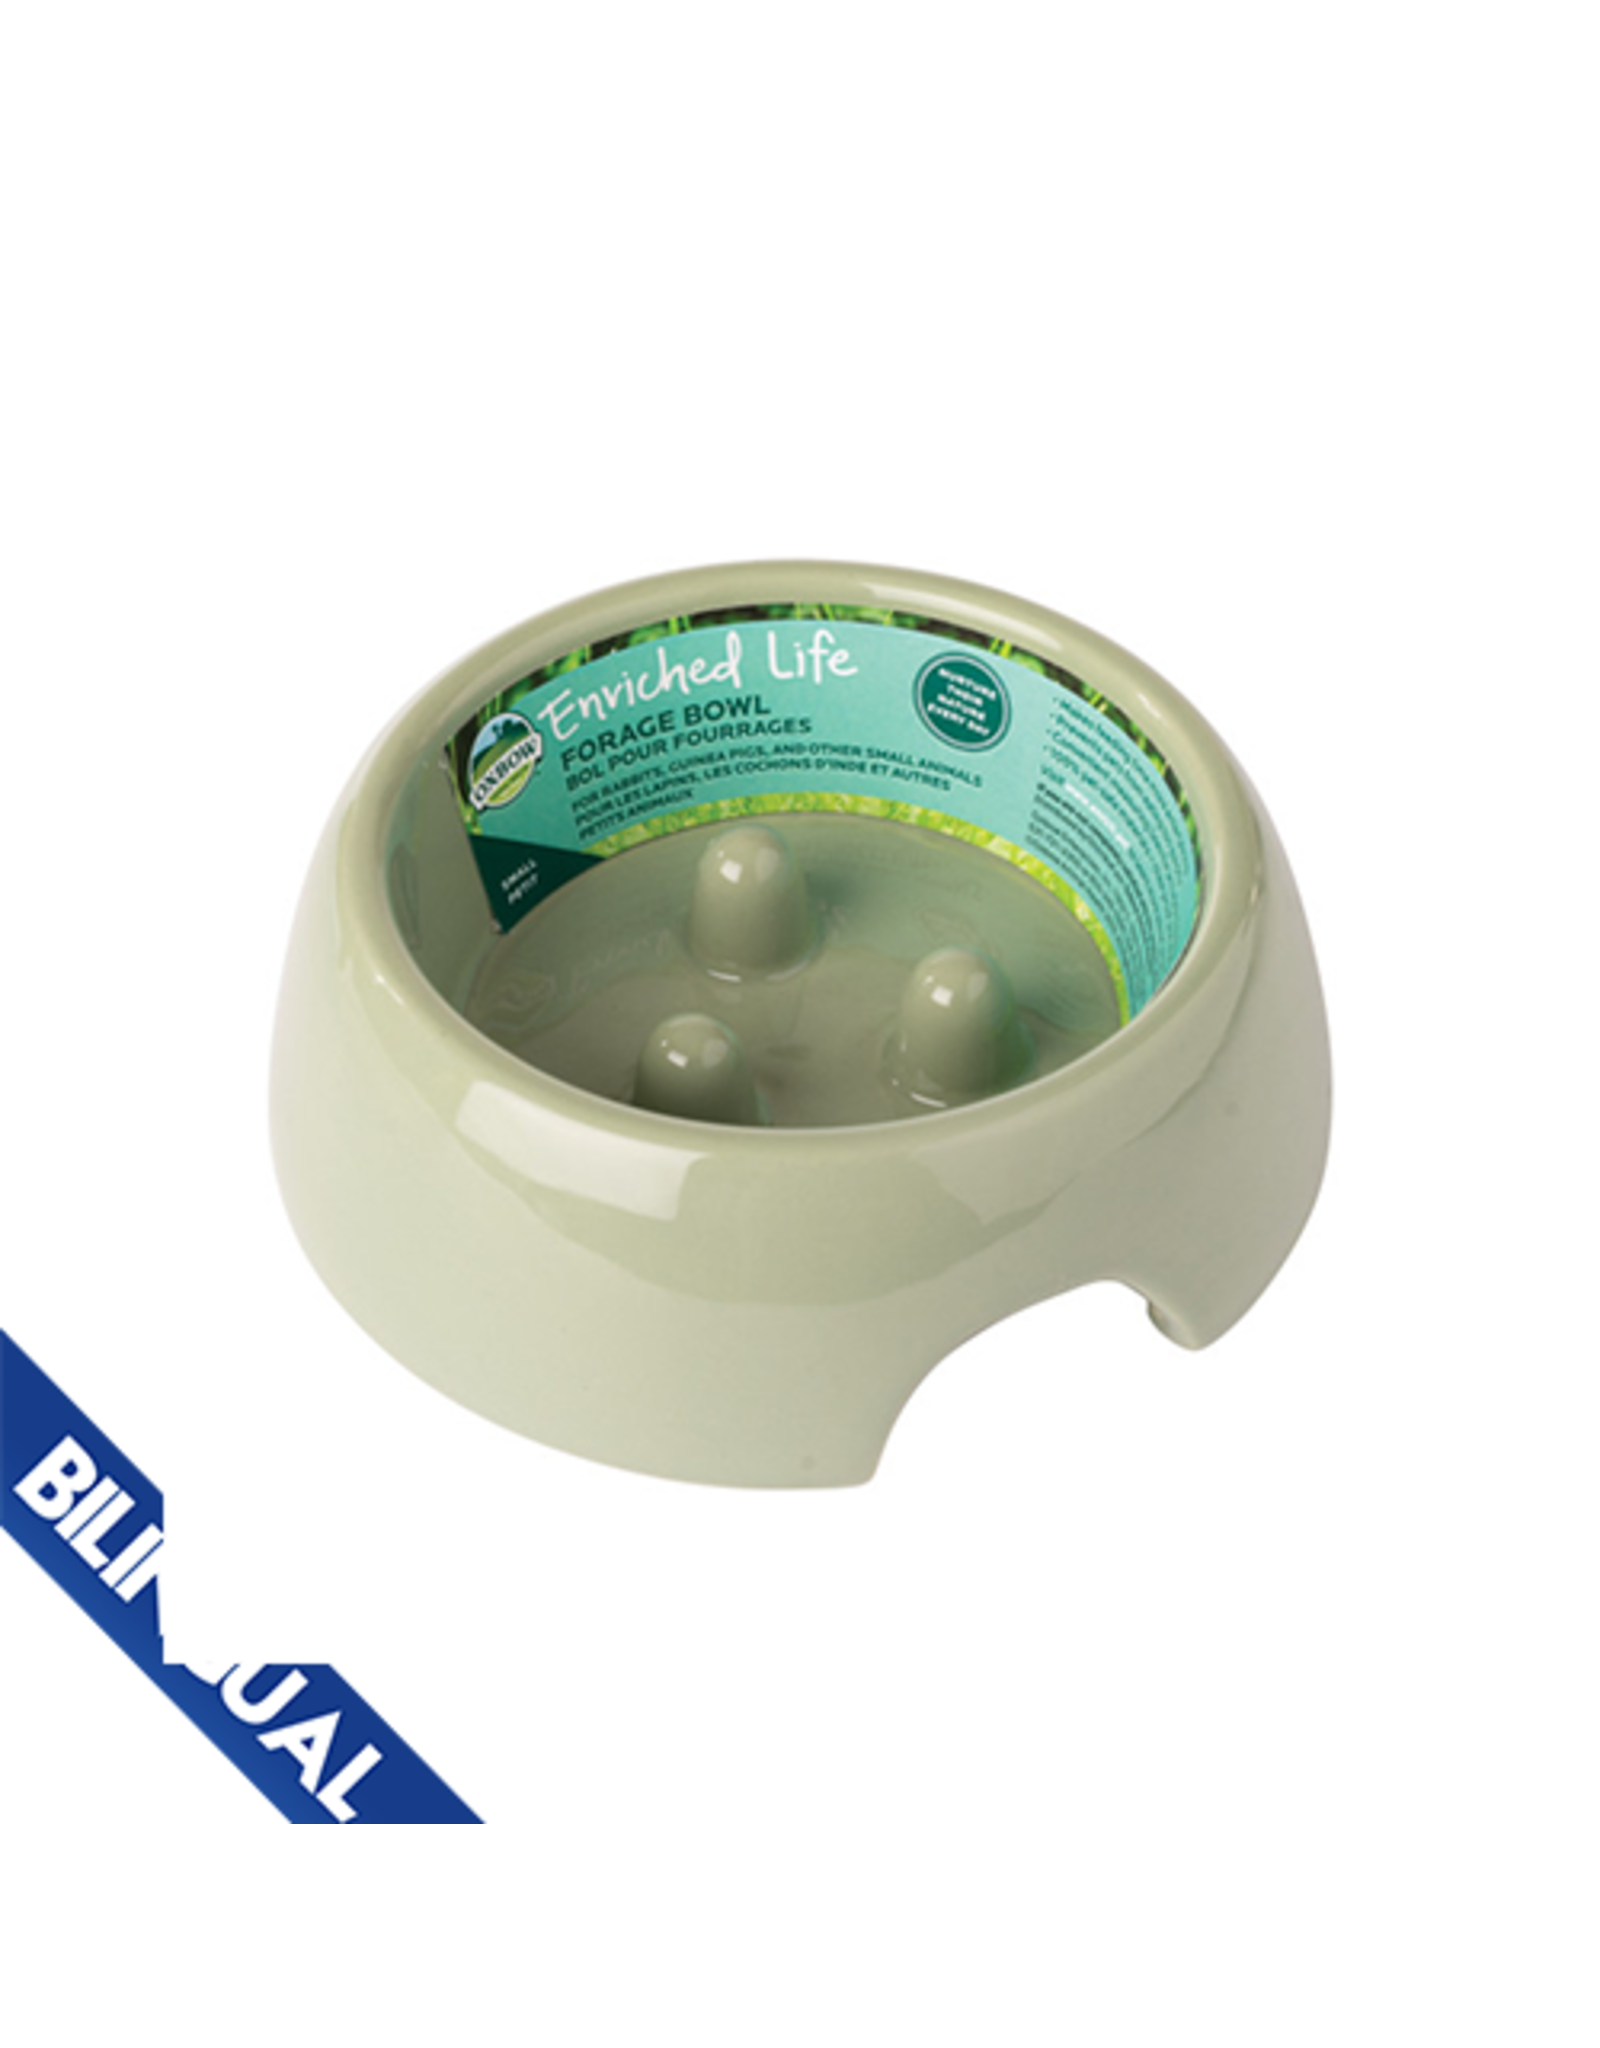 Oxbow Enriched Life Forage Bowl Small For Small Animals